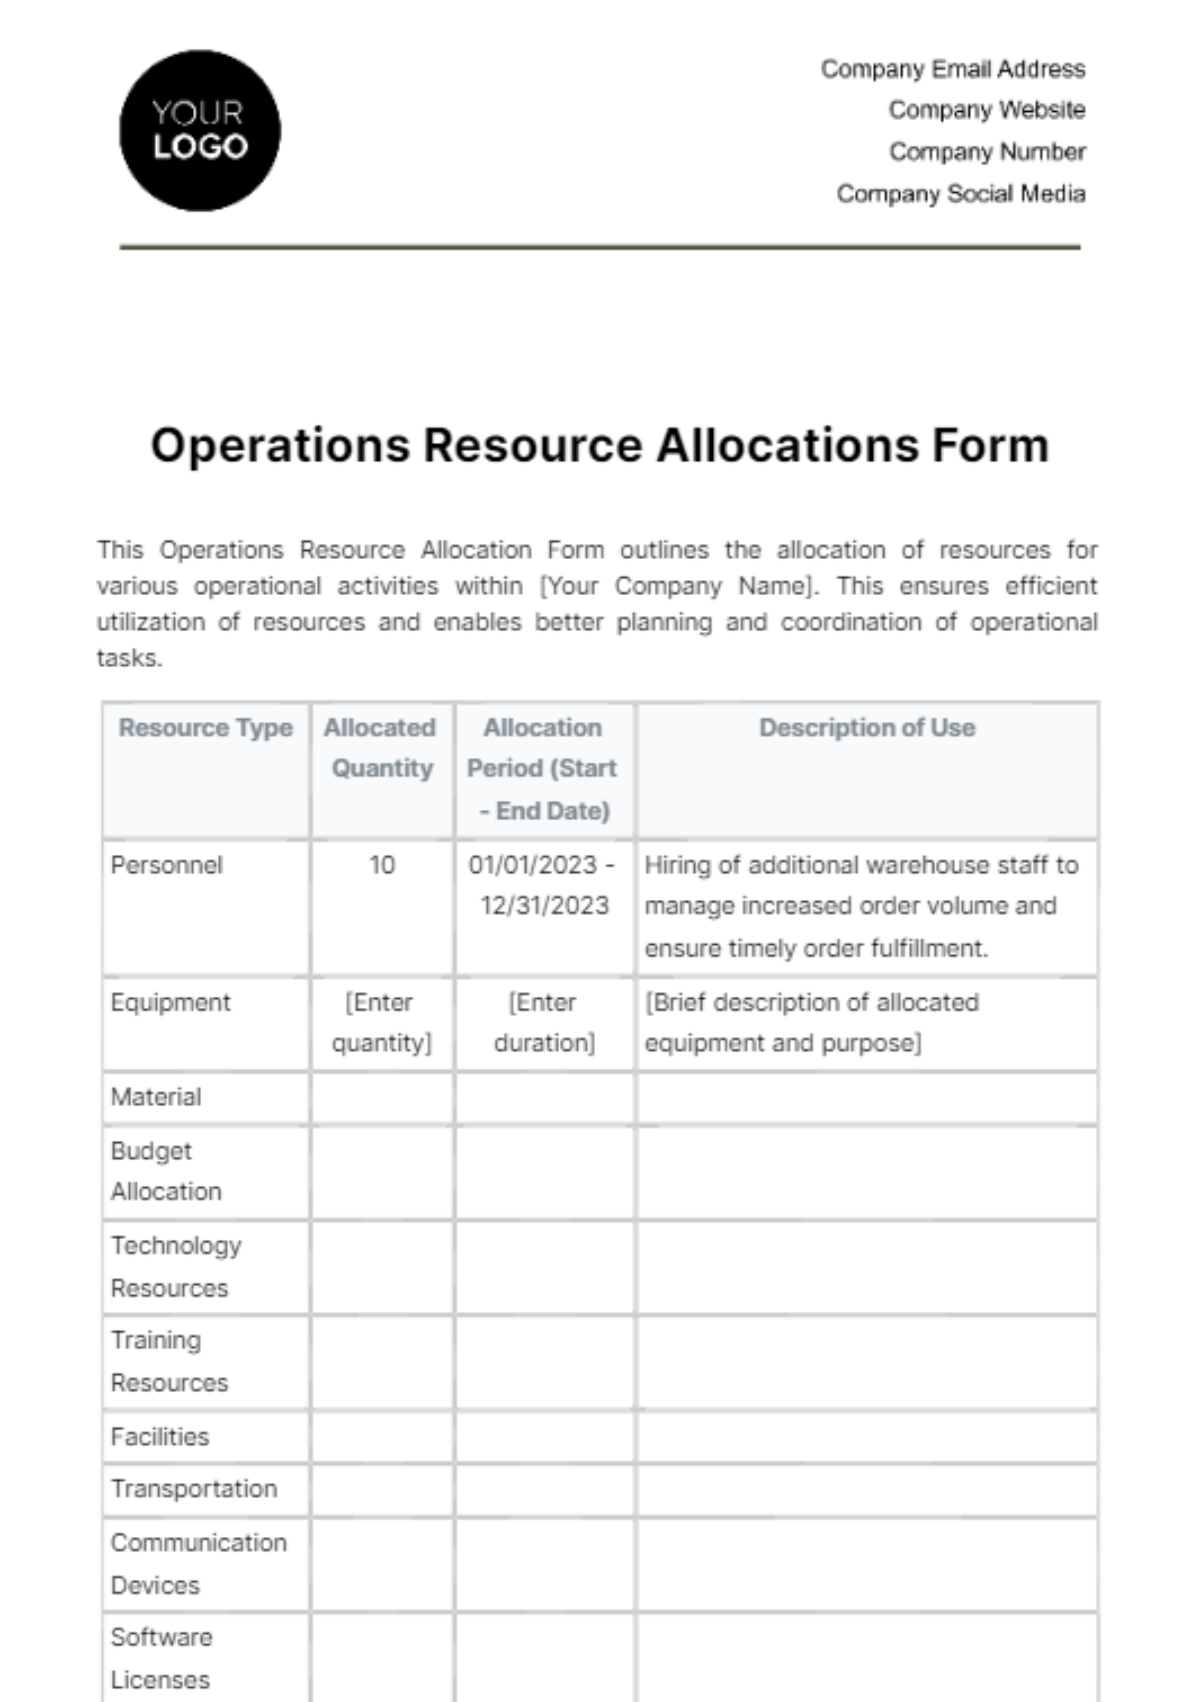 Operations Resource Allocation Form Template